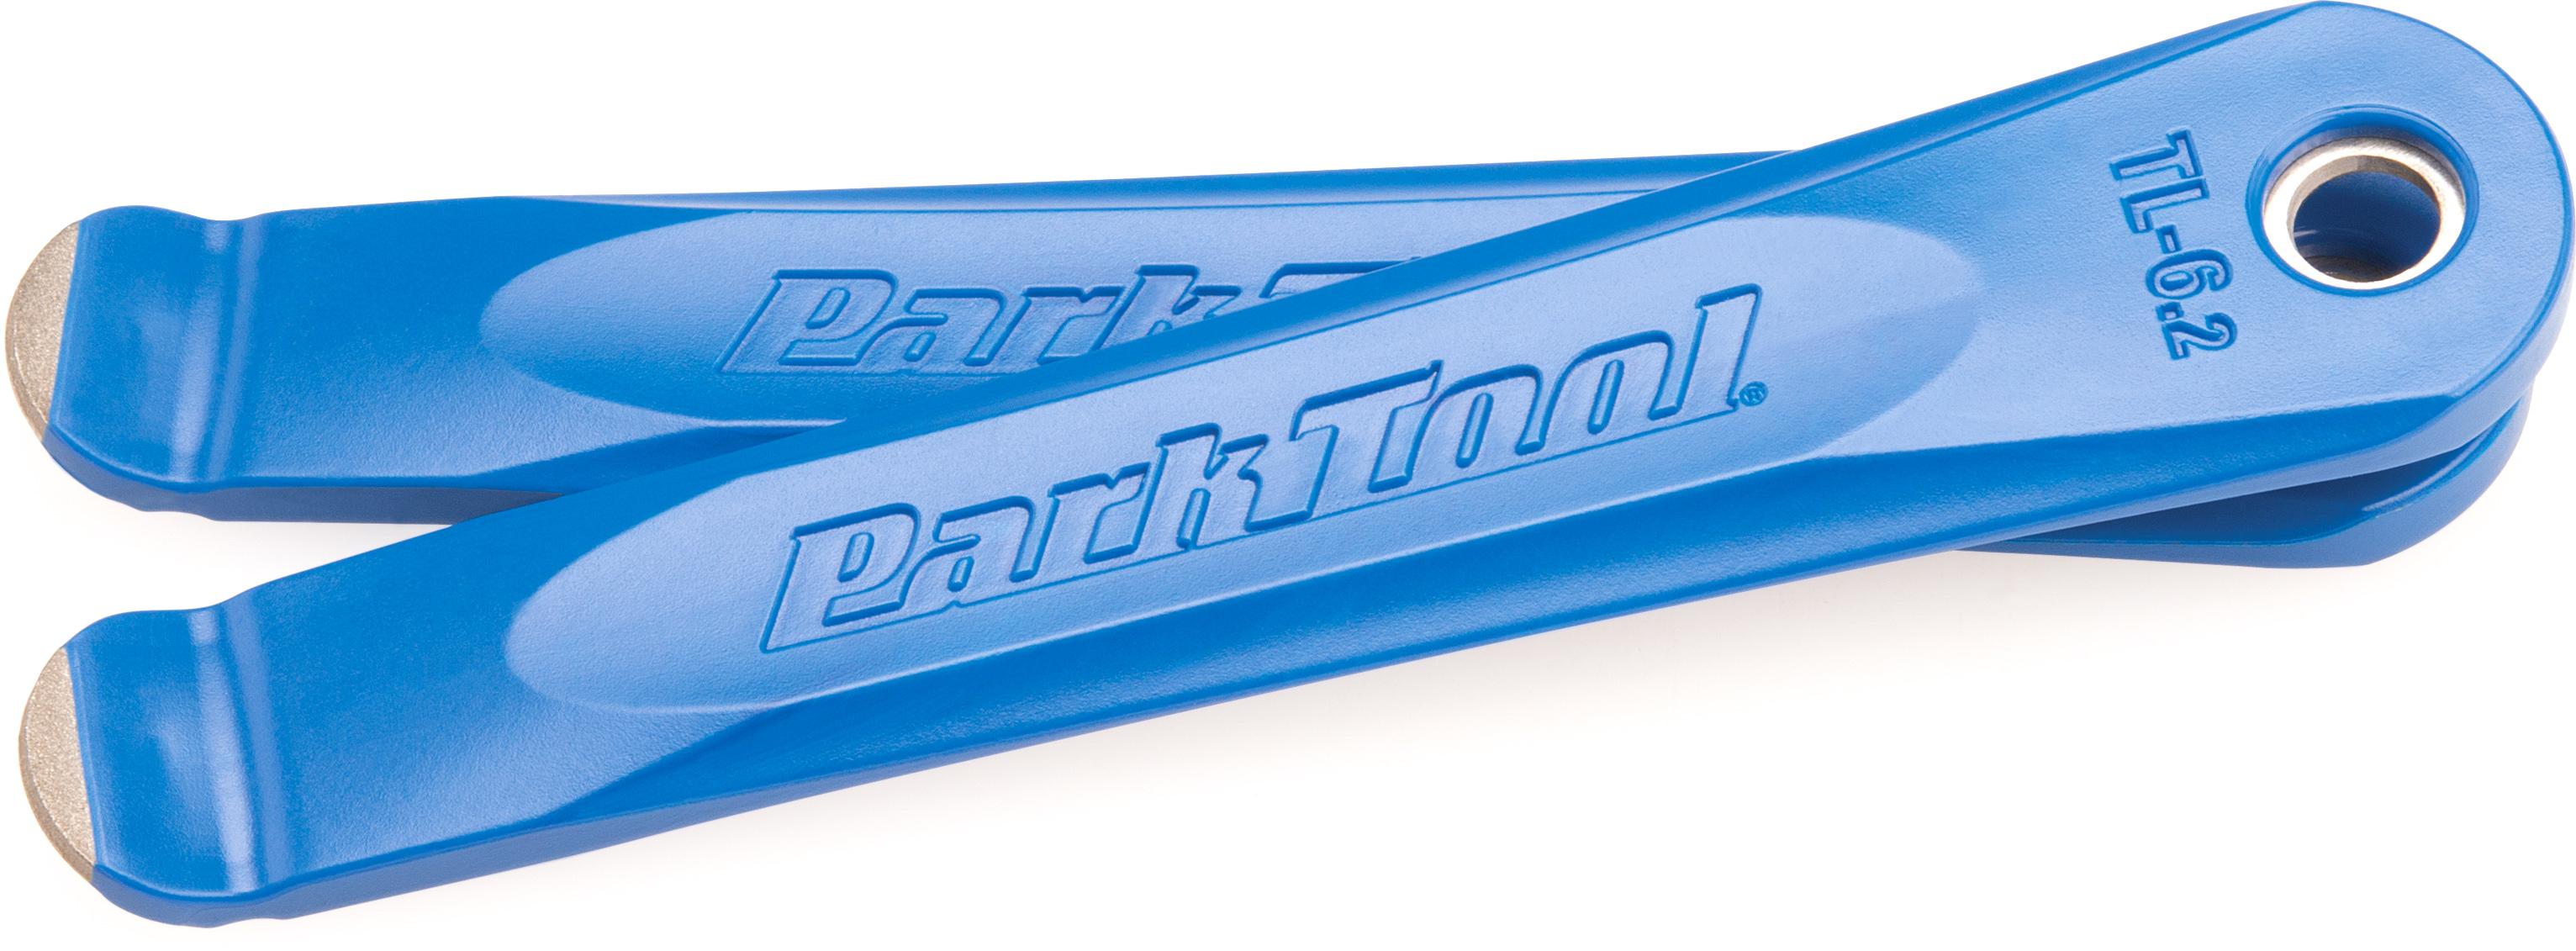 Park Tool Steel Core Tyre Levers Tl-6.2 (set Of 2) - Blue